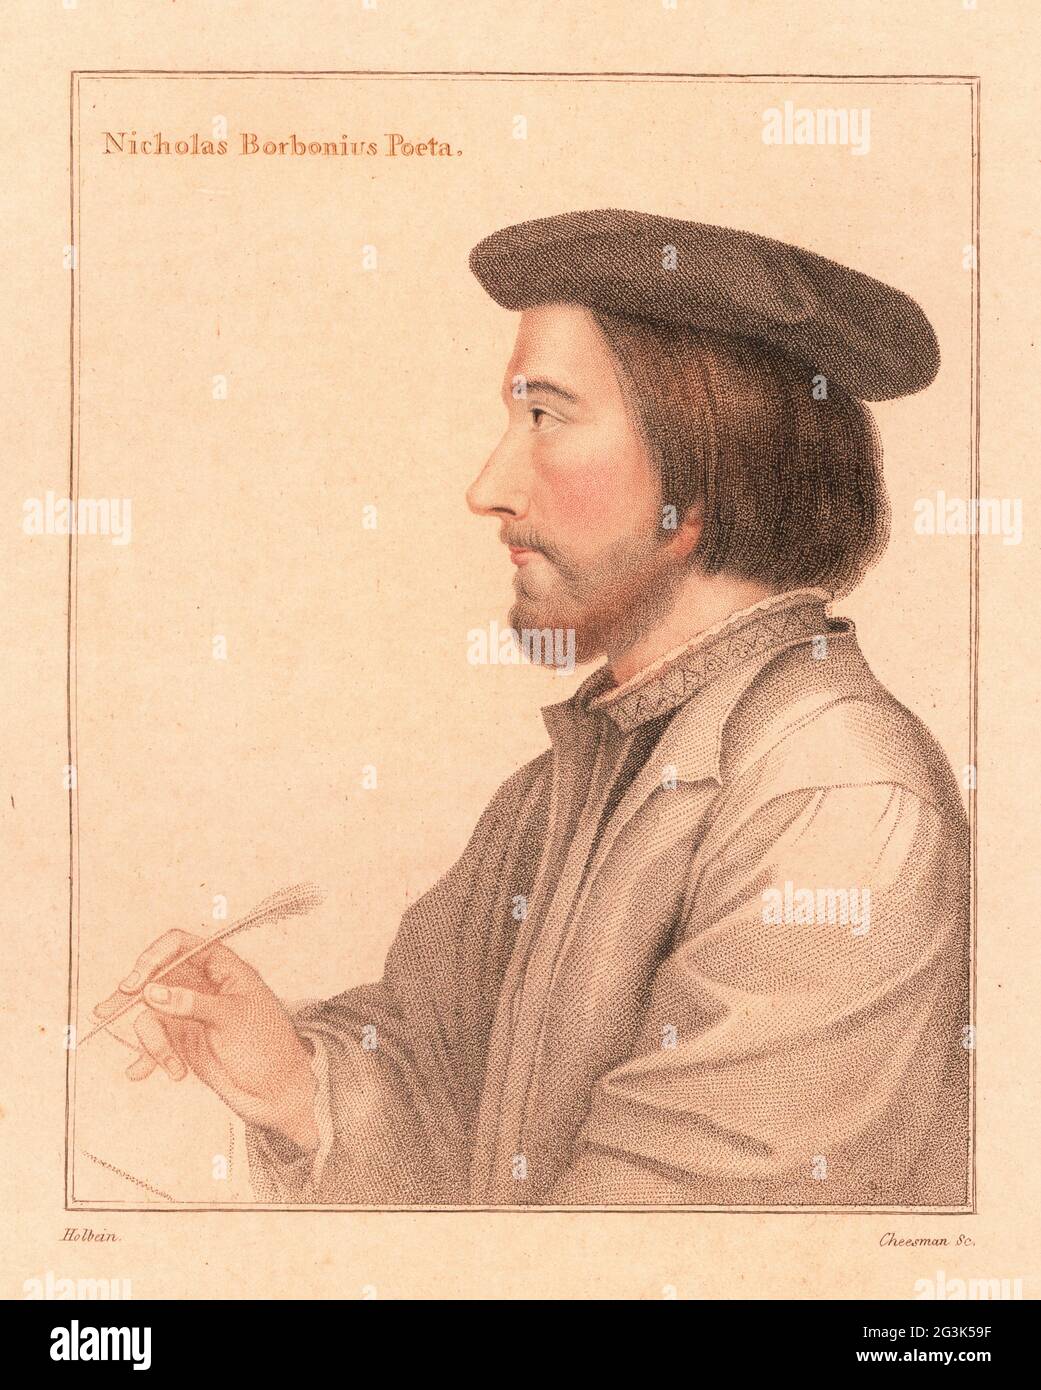 Nicholas Borbonius or Bourbon, Latin poet of middling fame, tutor to Joan d'Albret, daughter of Margaret Queen of Navarre, 1503-c.1550. Nicholas Borbonius Poeta. Handcoloured copperplate stipple engraving by Thomas Cheesman after a portrait by Hans Holbein the Younger on pink paper from Imitations of Original Drawings by Hans Holbein, John Chamberlaine, London, 1812. Stock Photo